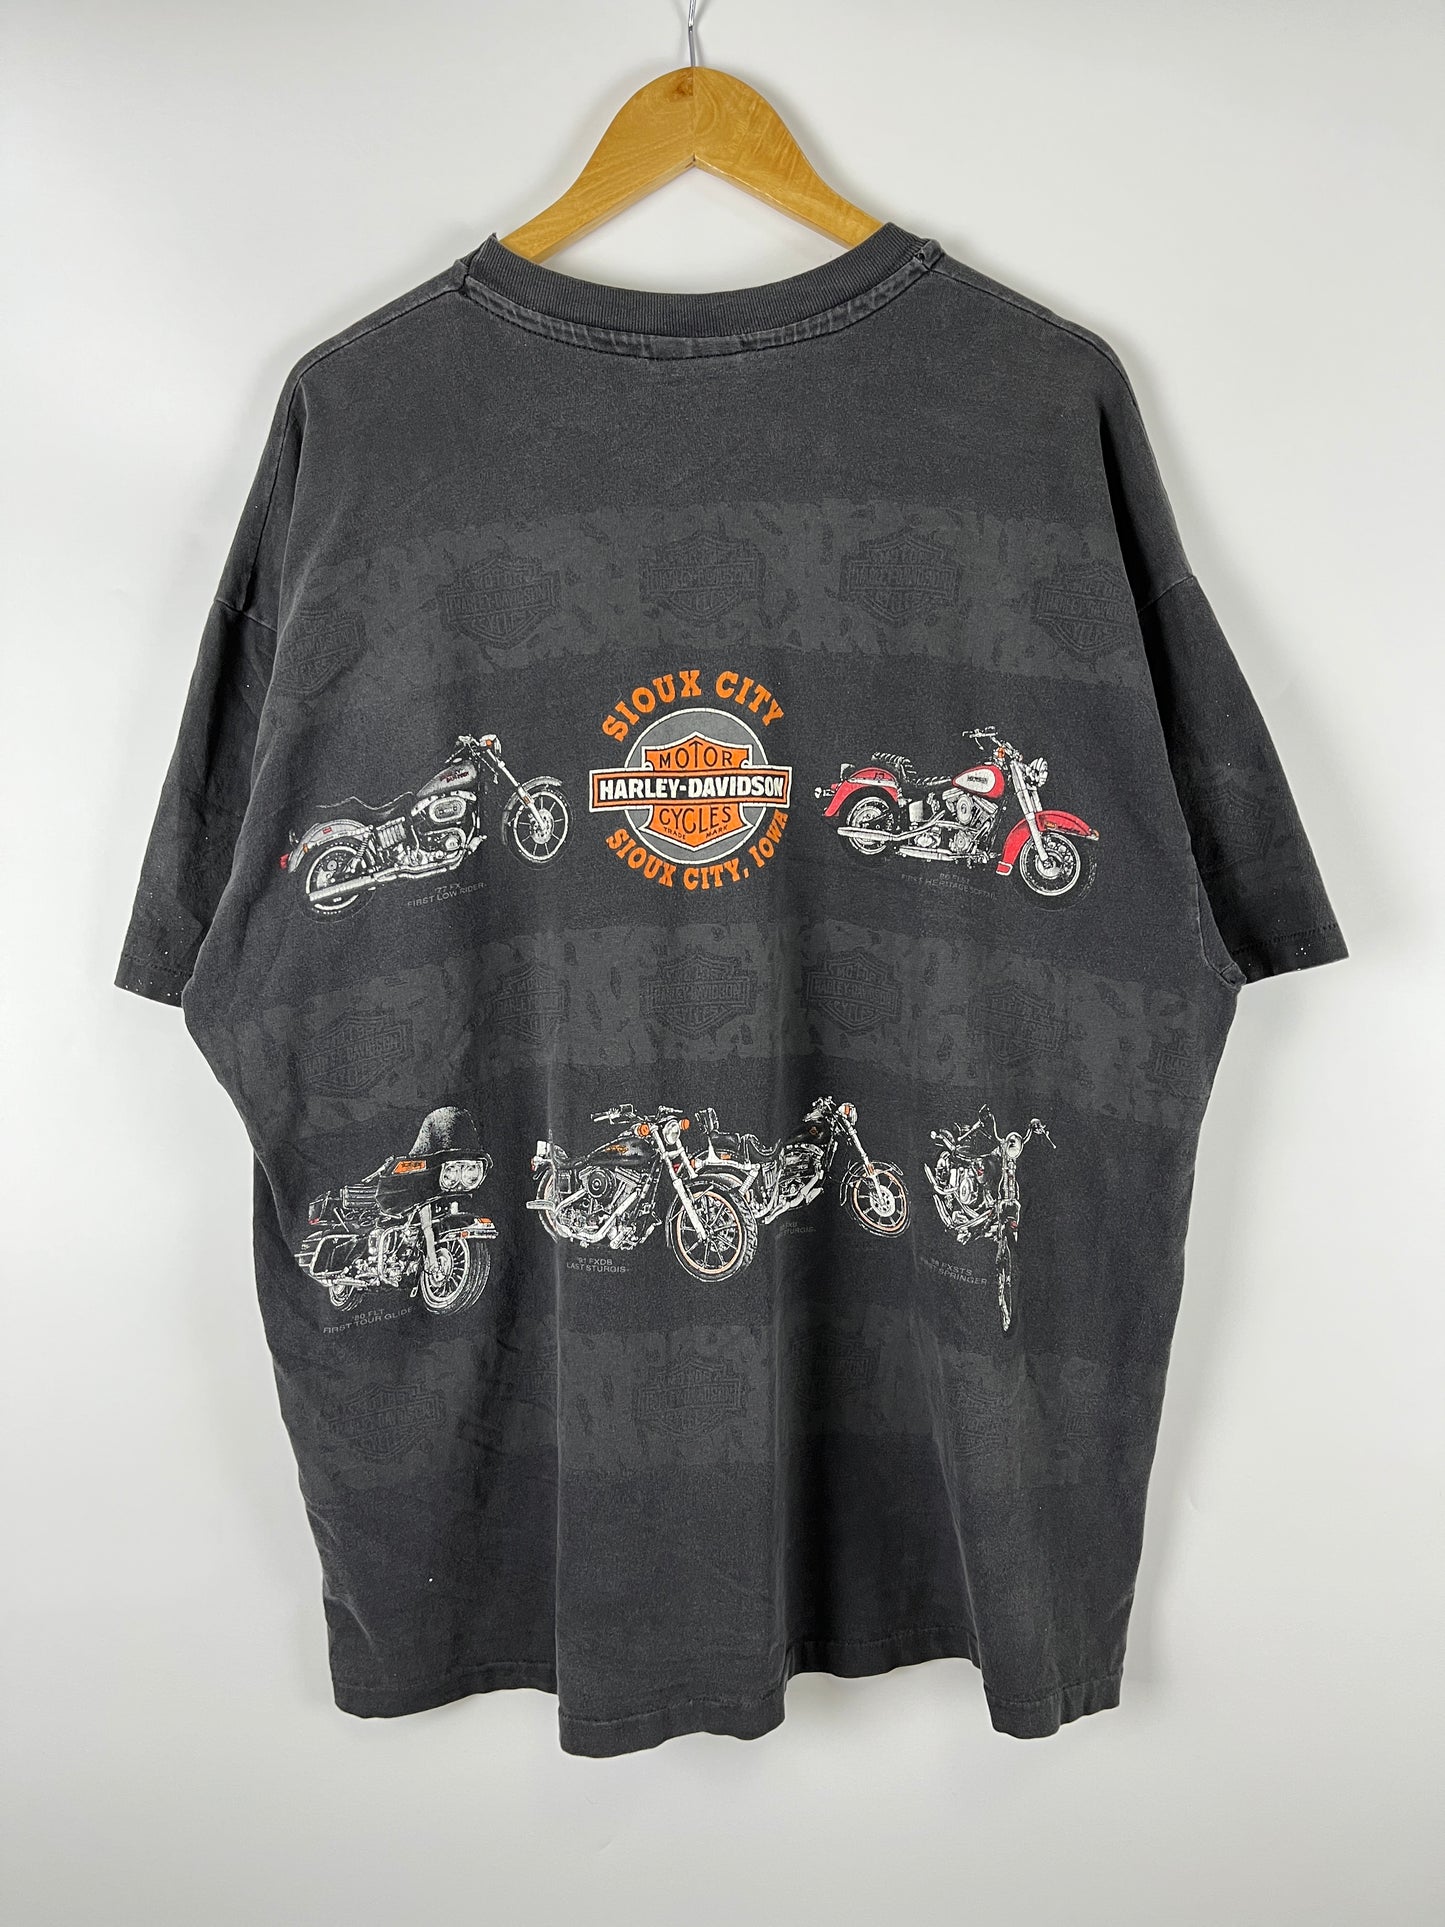 Vintage Harley Division 90's made in USA AOP T-shirt